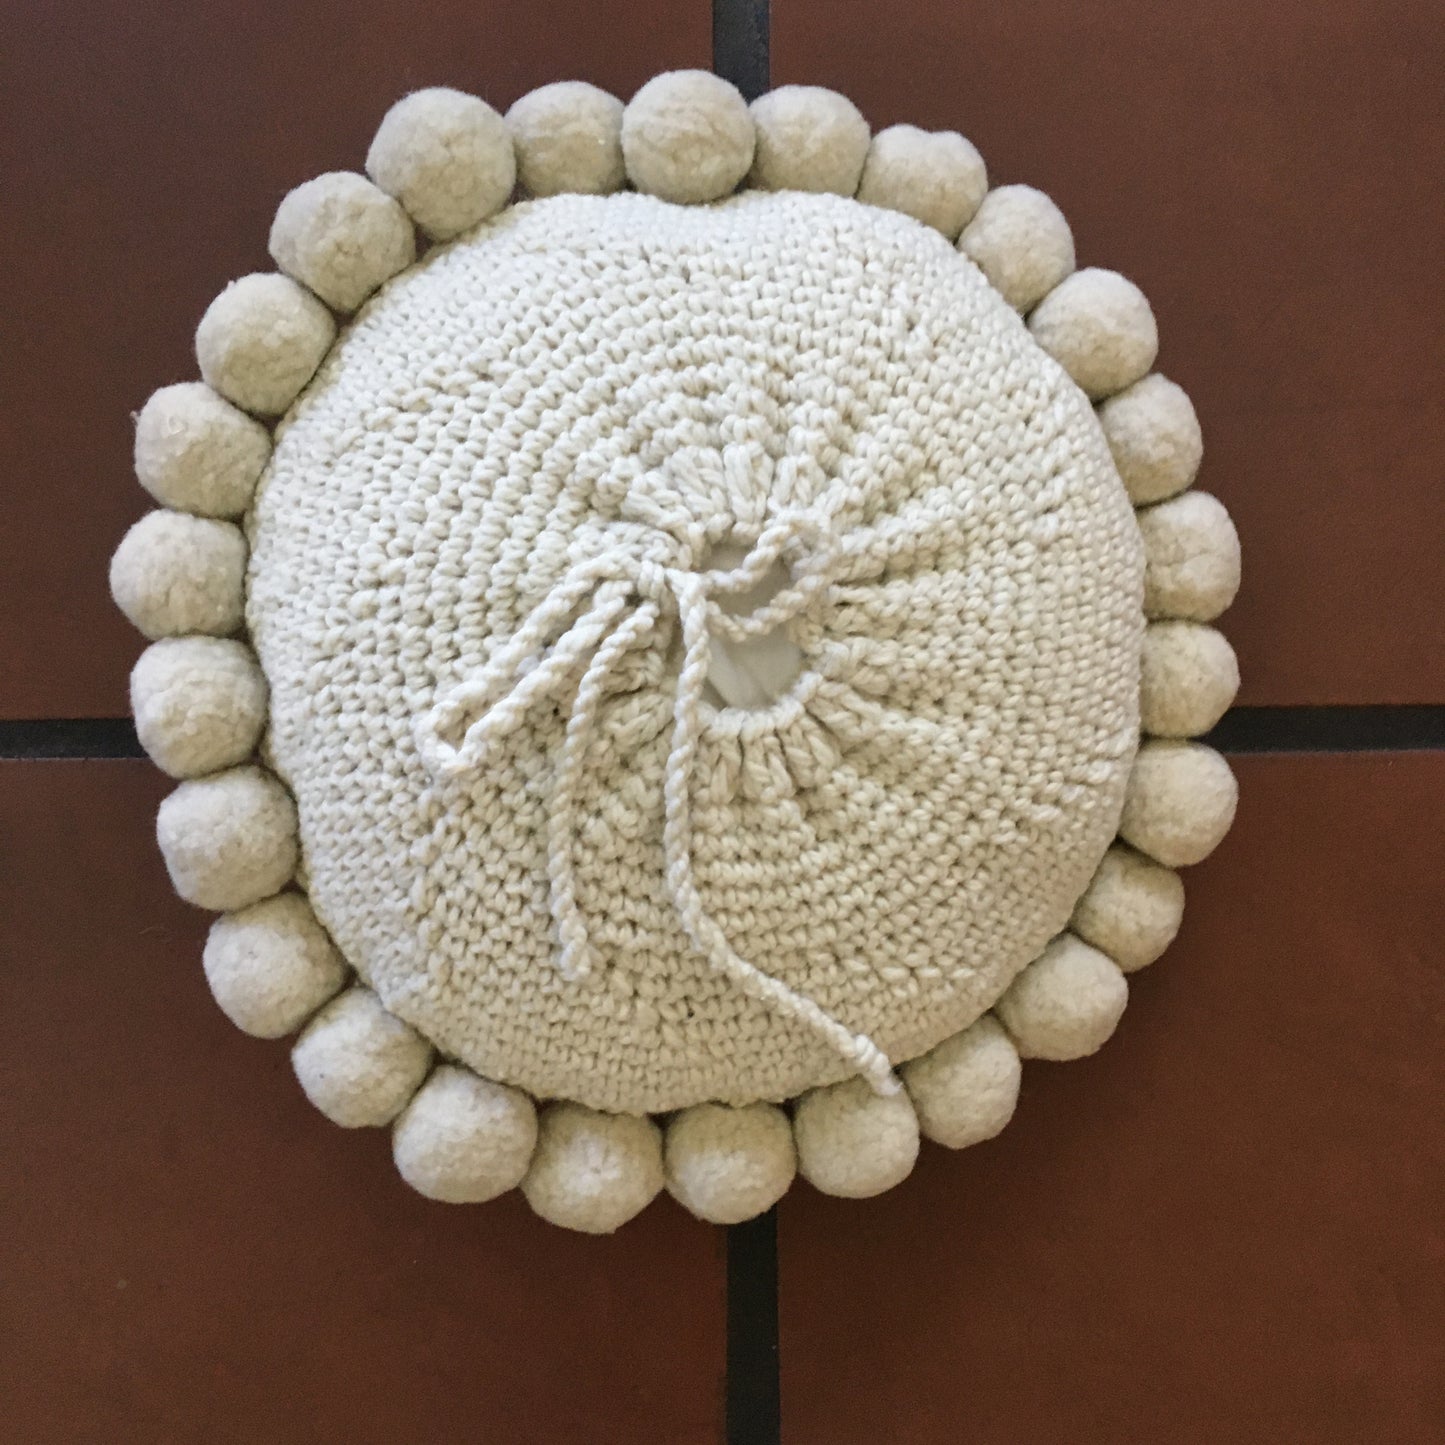 Bespoke Round Sheep's Wool Pillow With Down Insert